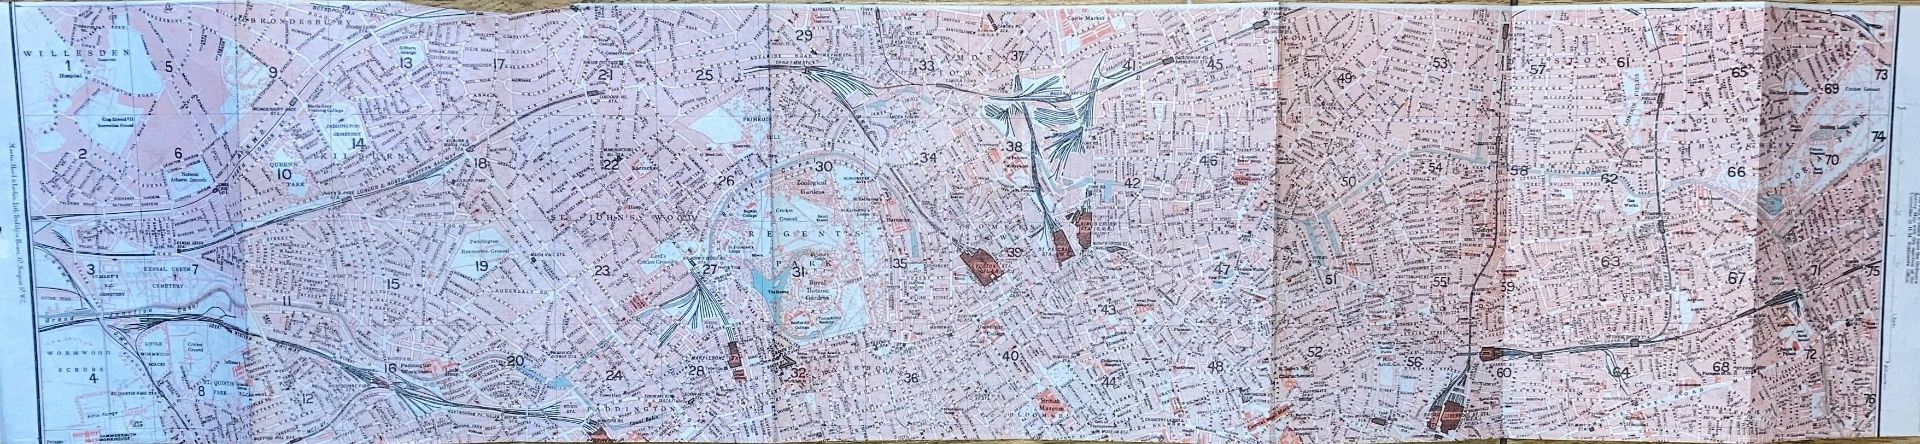 London & Environs Detailed Section 1 Antique Large Rare Map.